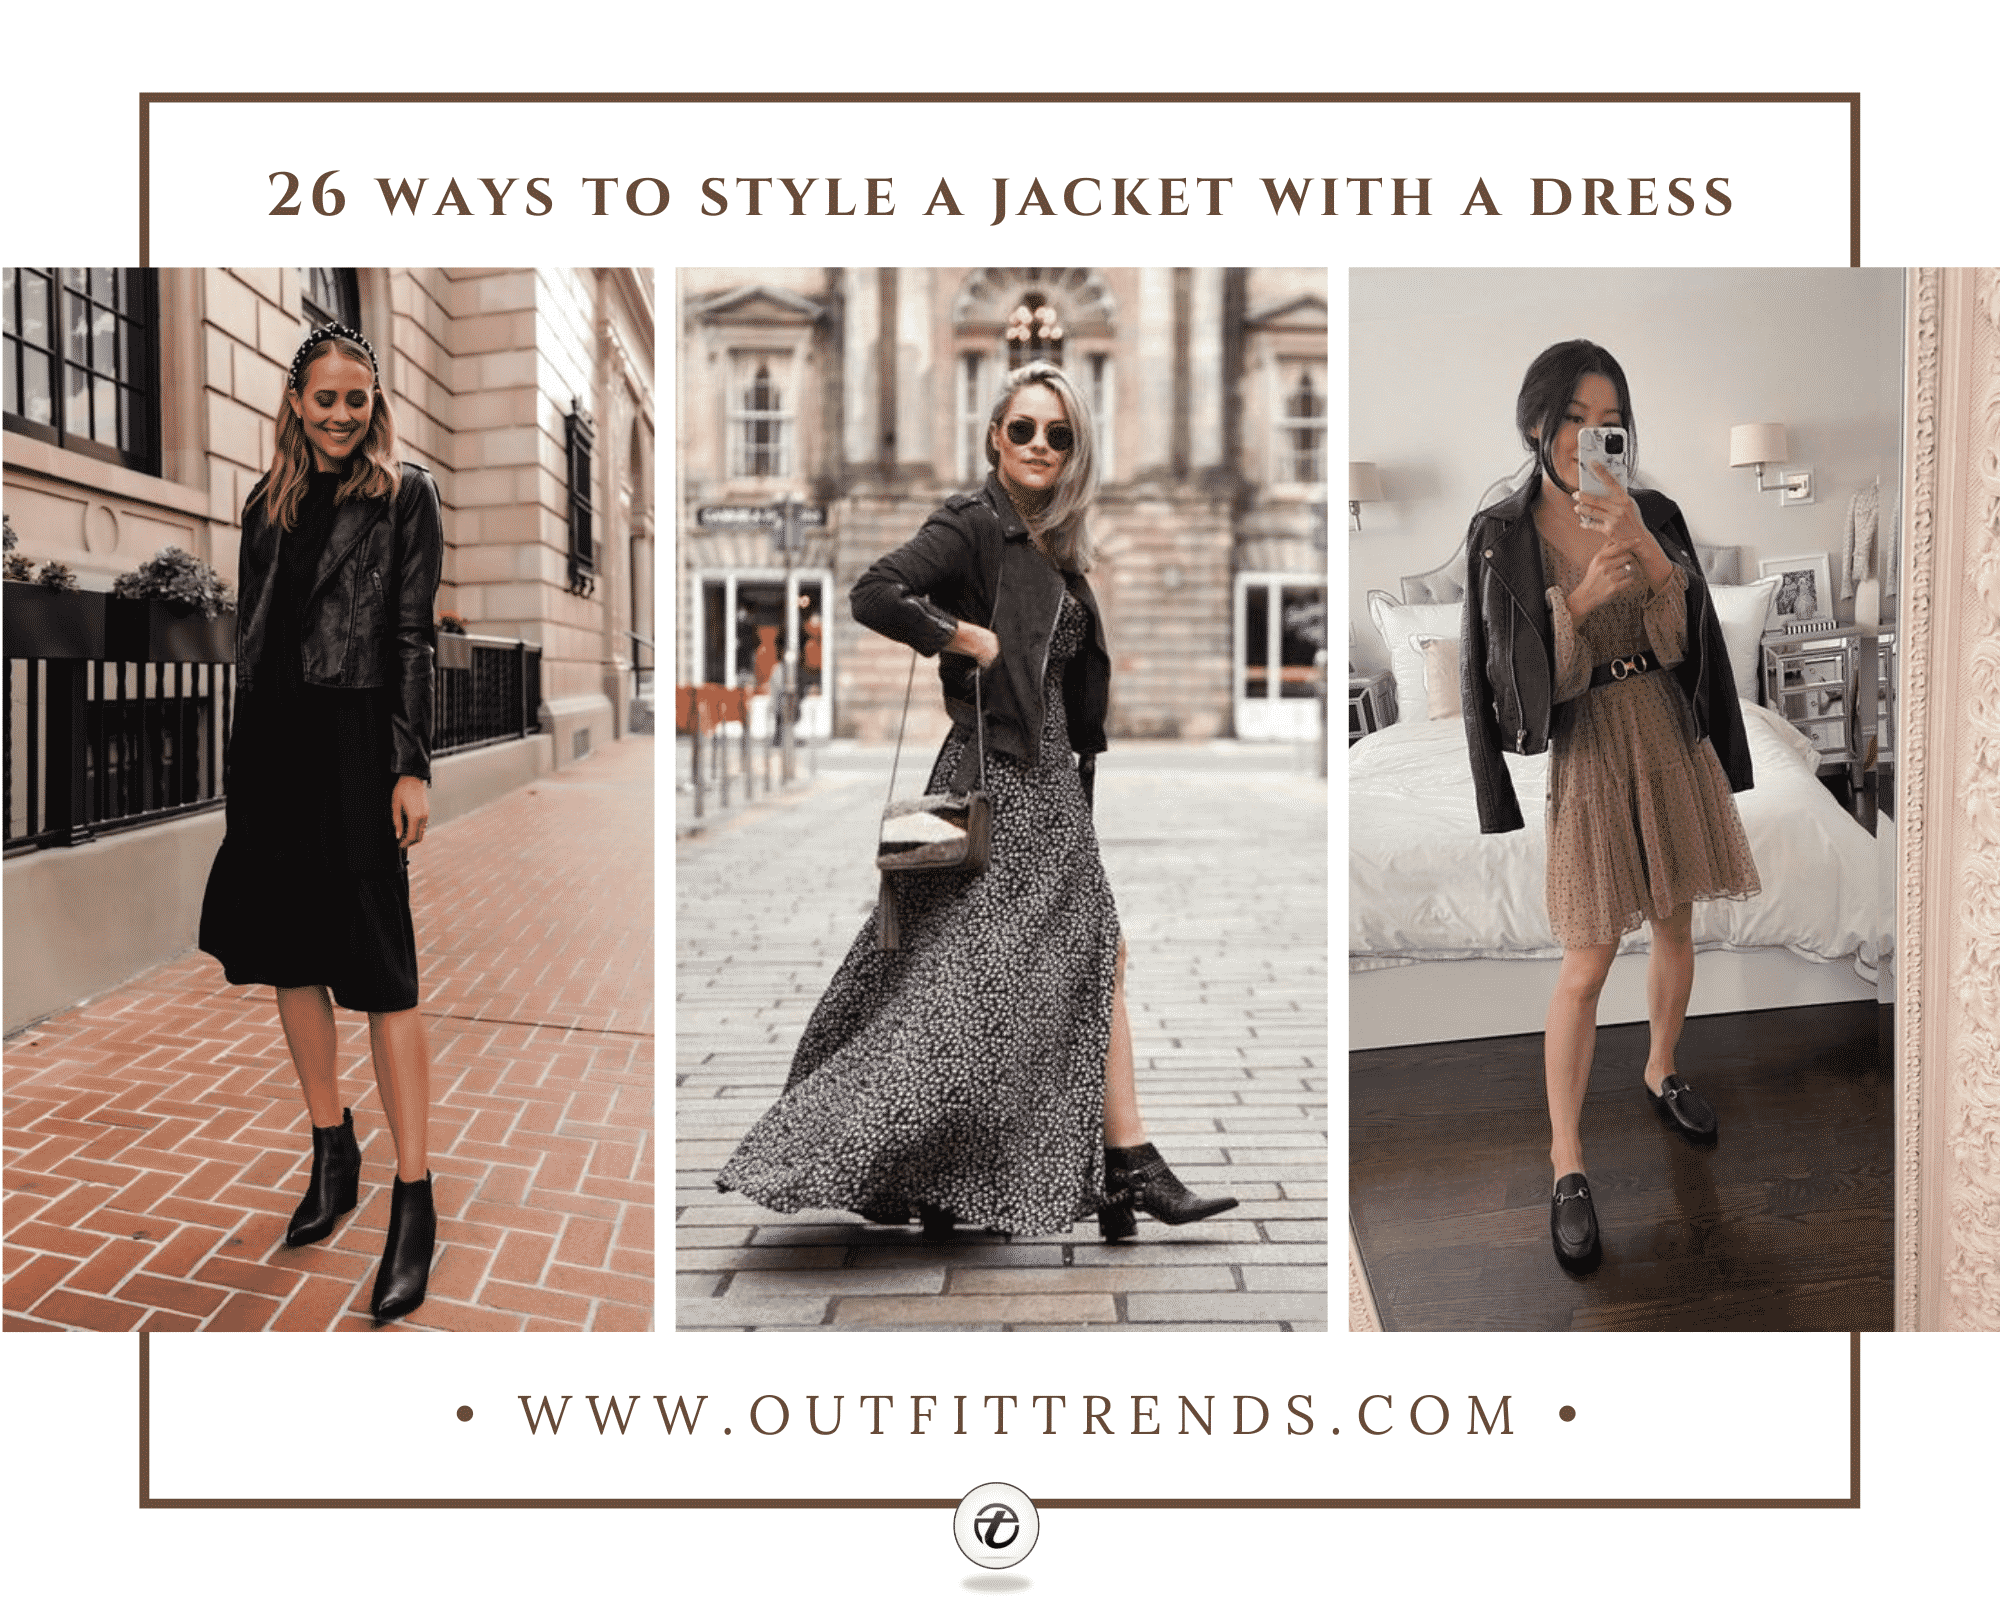 Stylish Jackets to Pair with an Off-the-Shoulder Dress